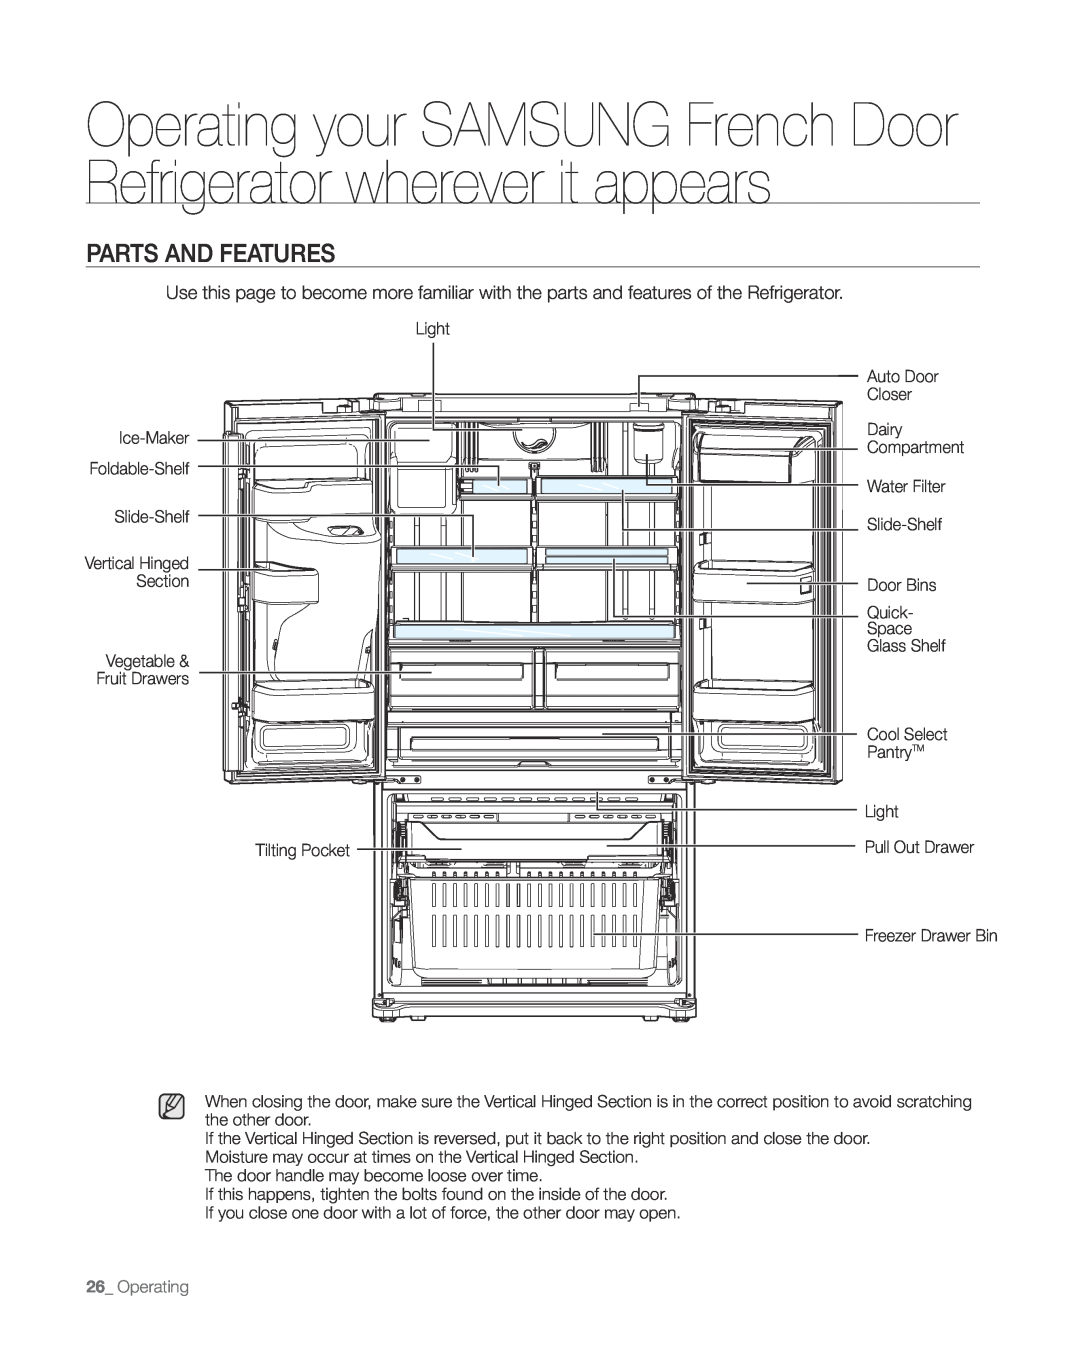 Sears RFG297AA manual Parts And Features, Operating your SAMSUNG French Door Refrigerator wherever it appears 